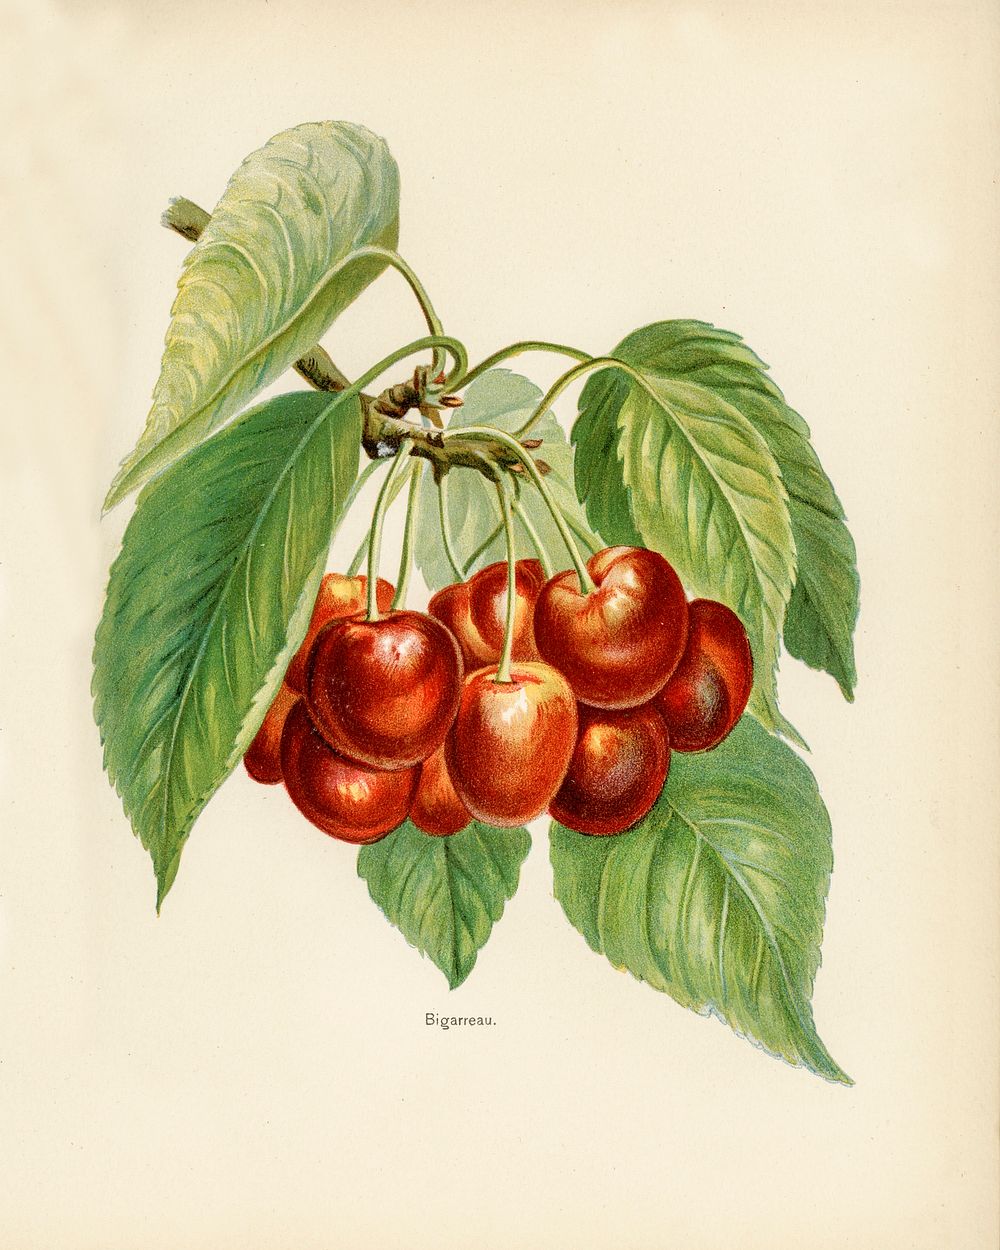 Vintage illustration of bigarreau cherries digitally enhanced from our own vintage edition of The Fruit Grower's Guide…